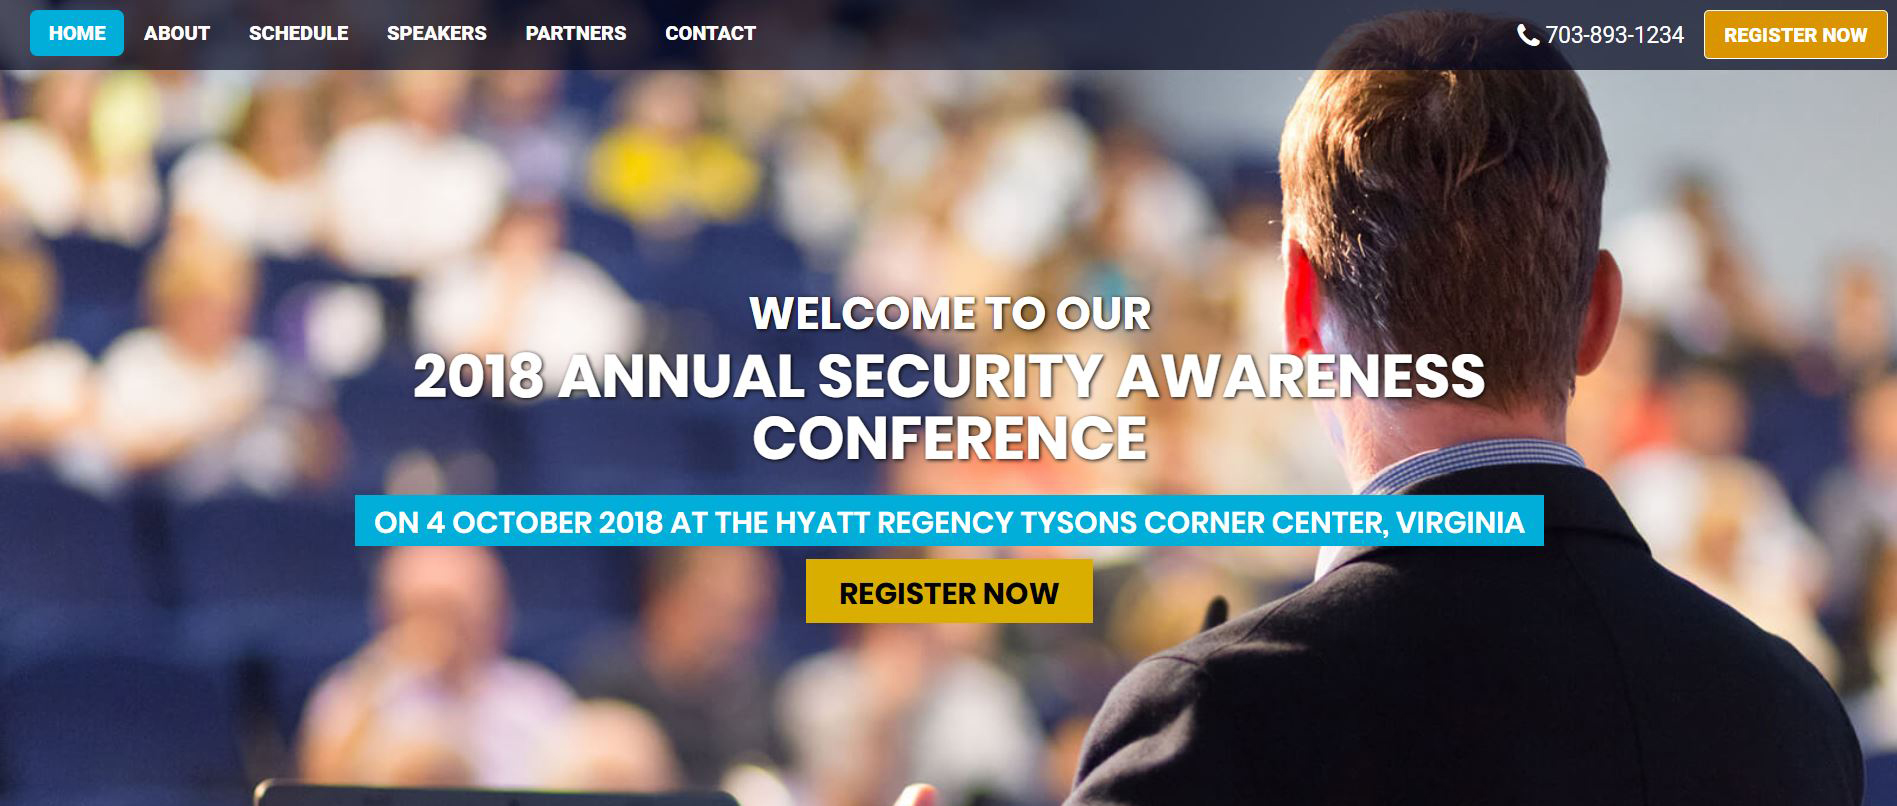 IsI Conference Landing Page